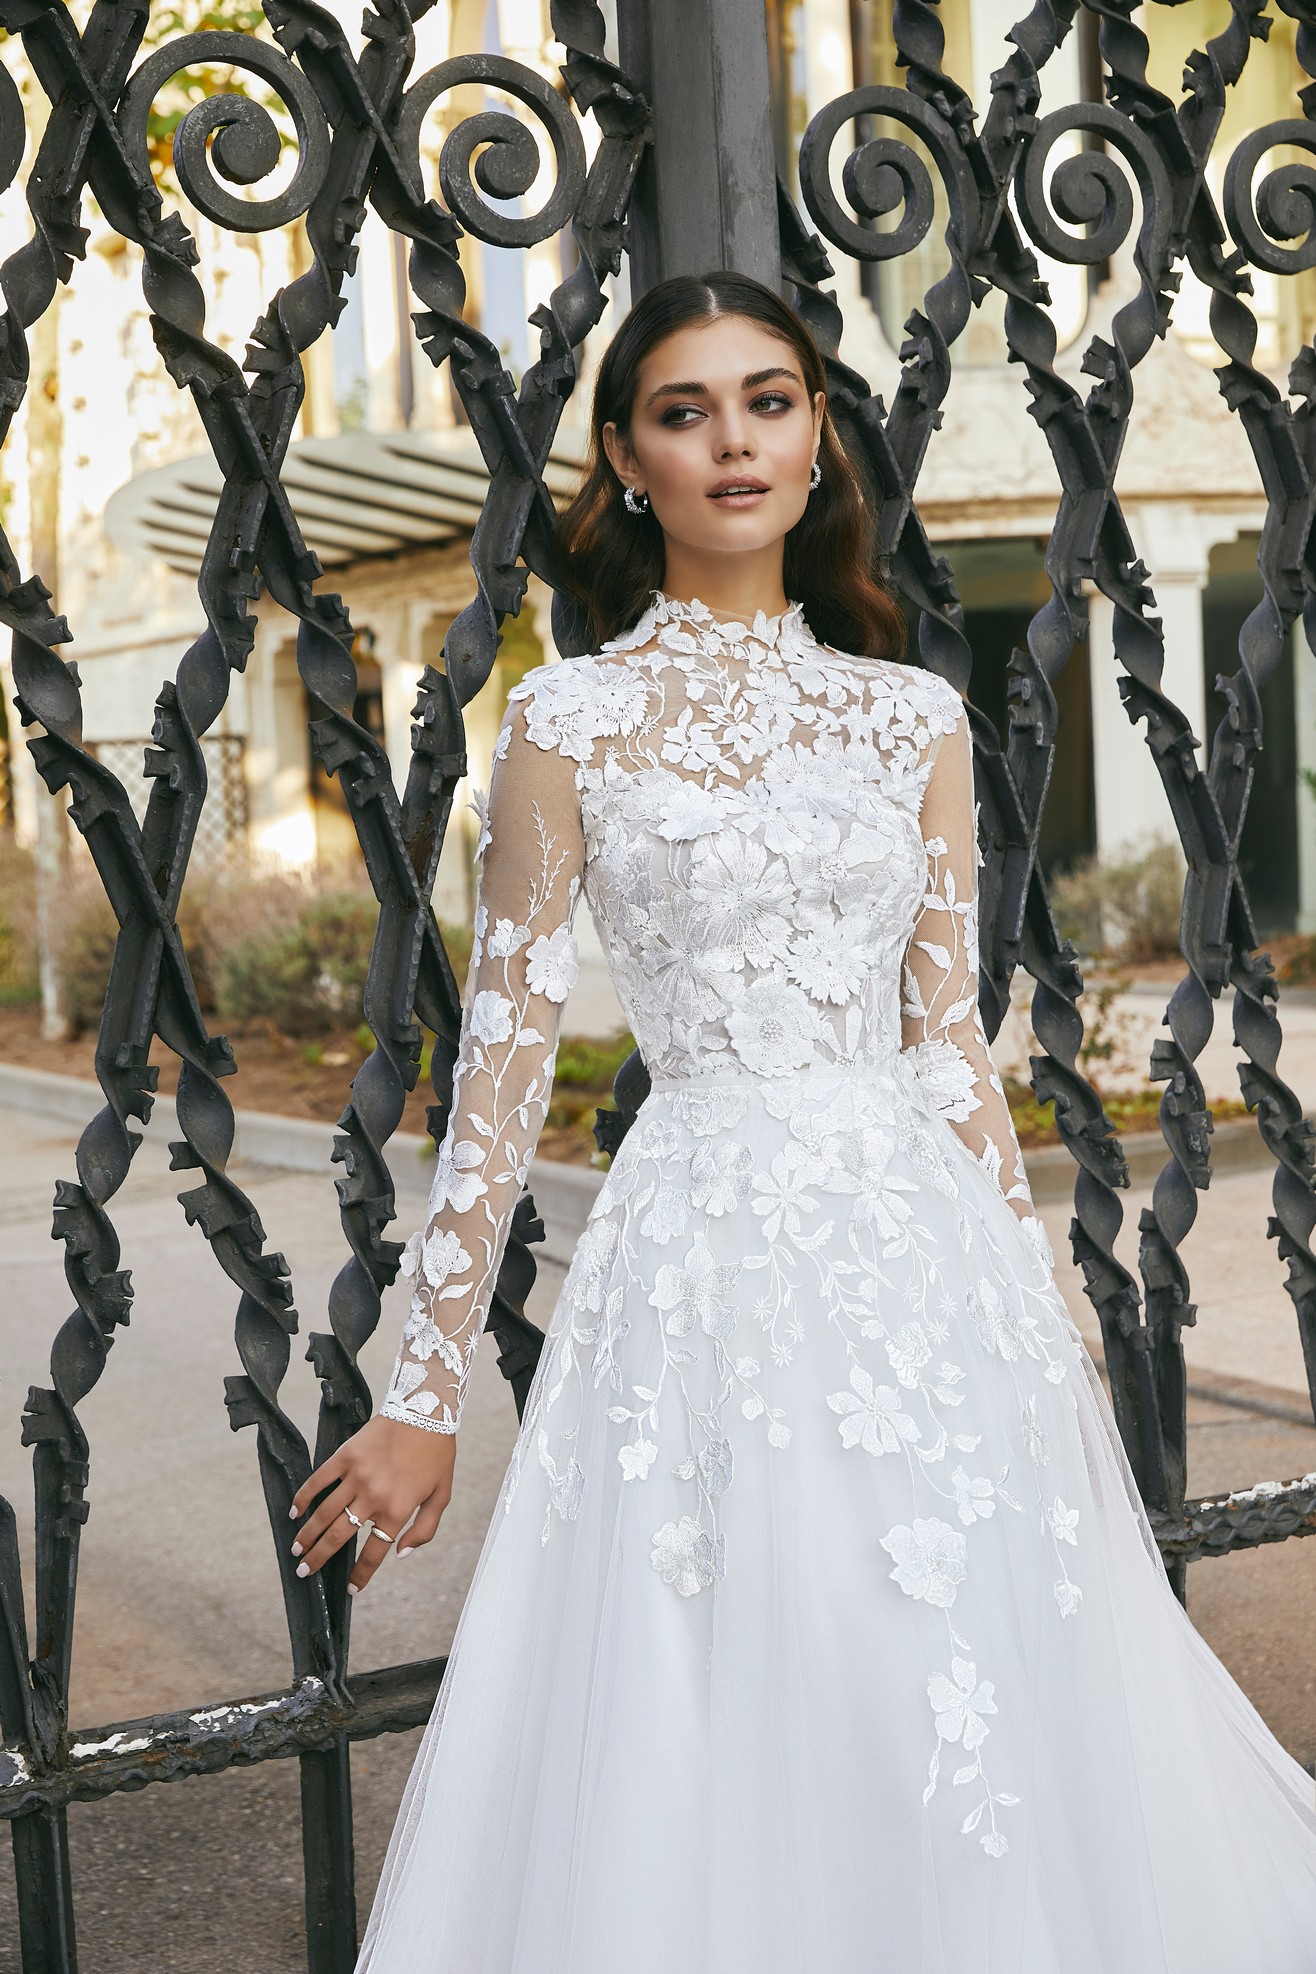 Brunette model stood by black railing in Ronald Joyce 69717, an exquisite lace applique A-line wedding dress with an illusion high neckline, long sheer applique sleeves, 3D flowers and an organza and tulle skirt.